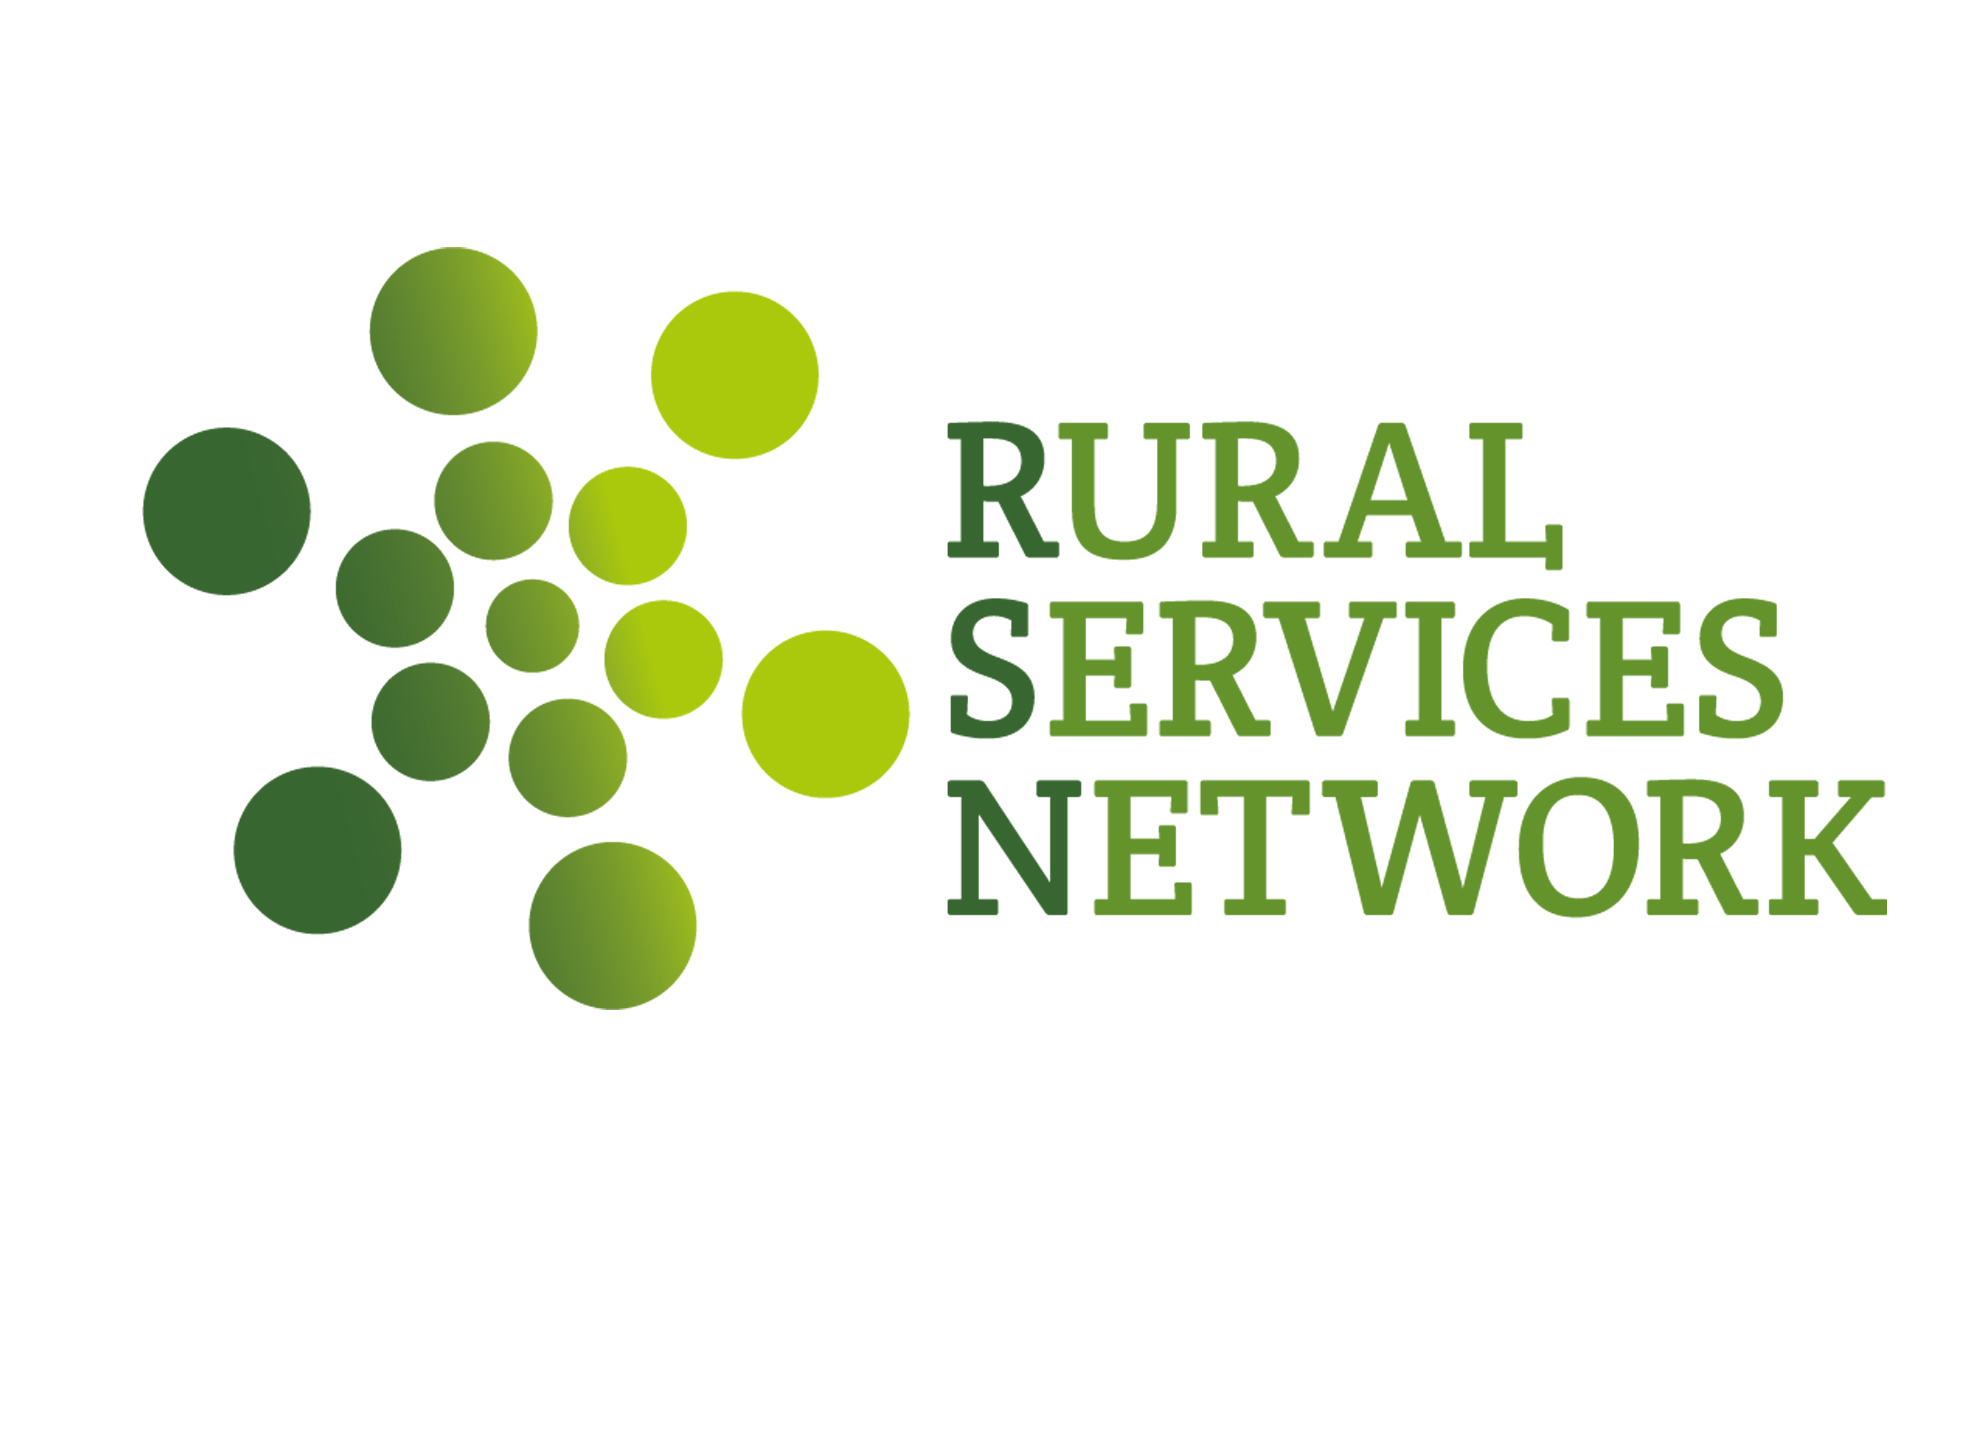 Rural Services Network – Rural Village Services Group feature